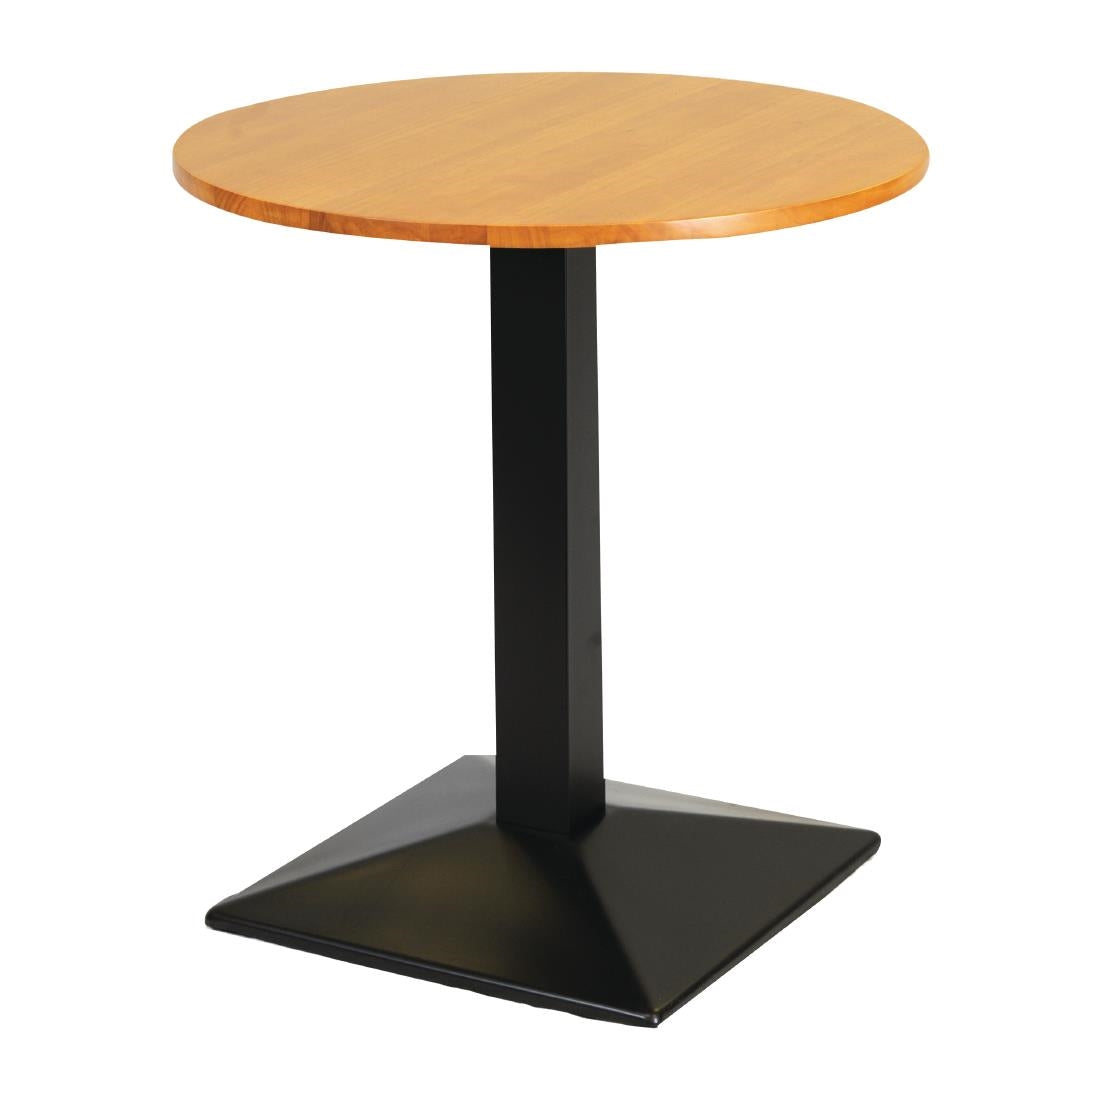 FT500 Turin Metal Base Pedestal Round Table with Soft Oak Top 700mm JD Catering Equipment Solutions Ltd